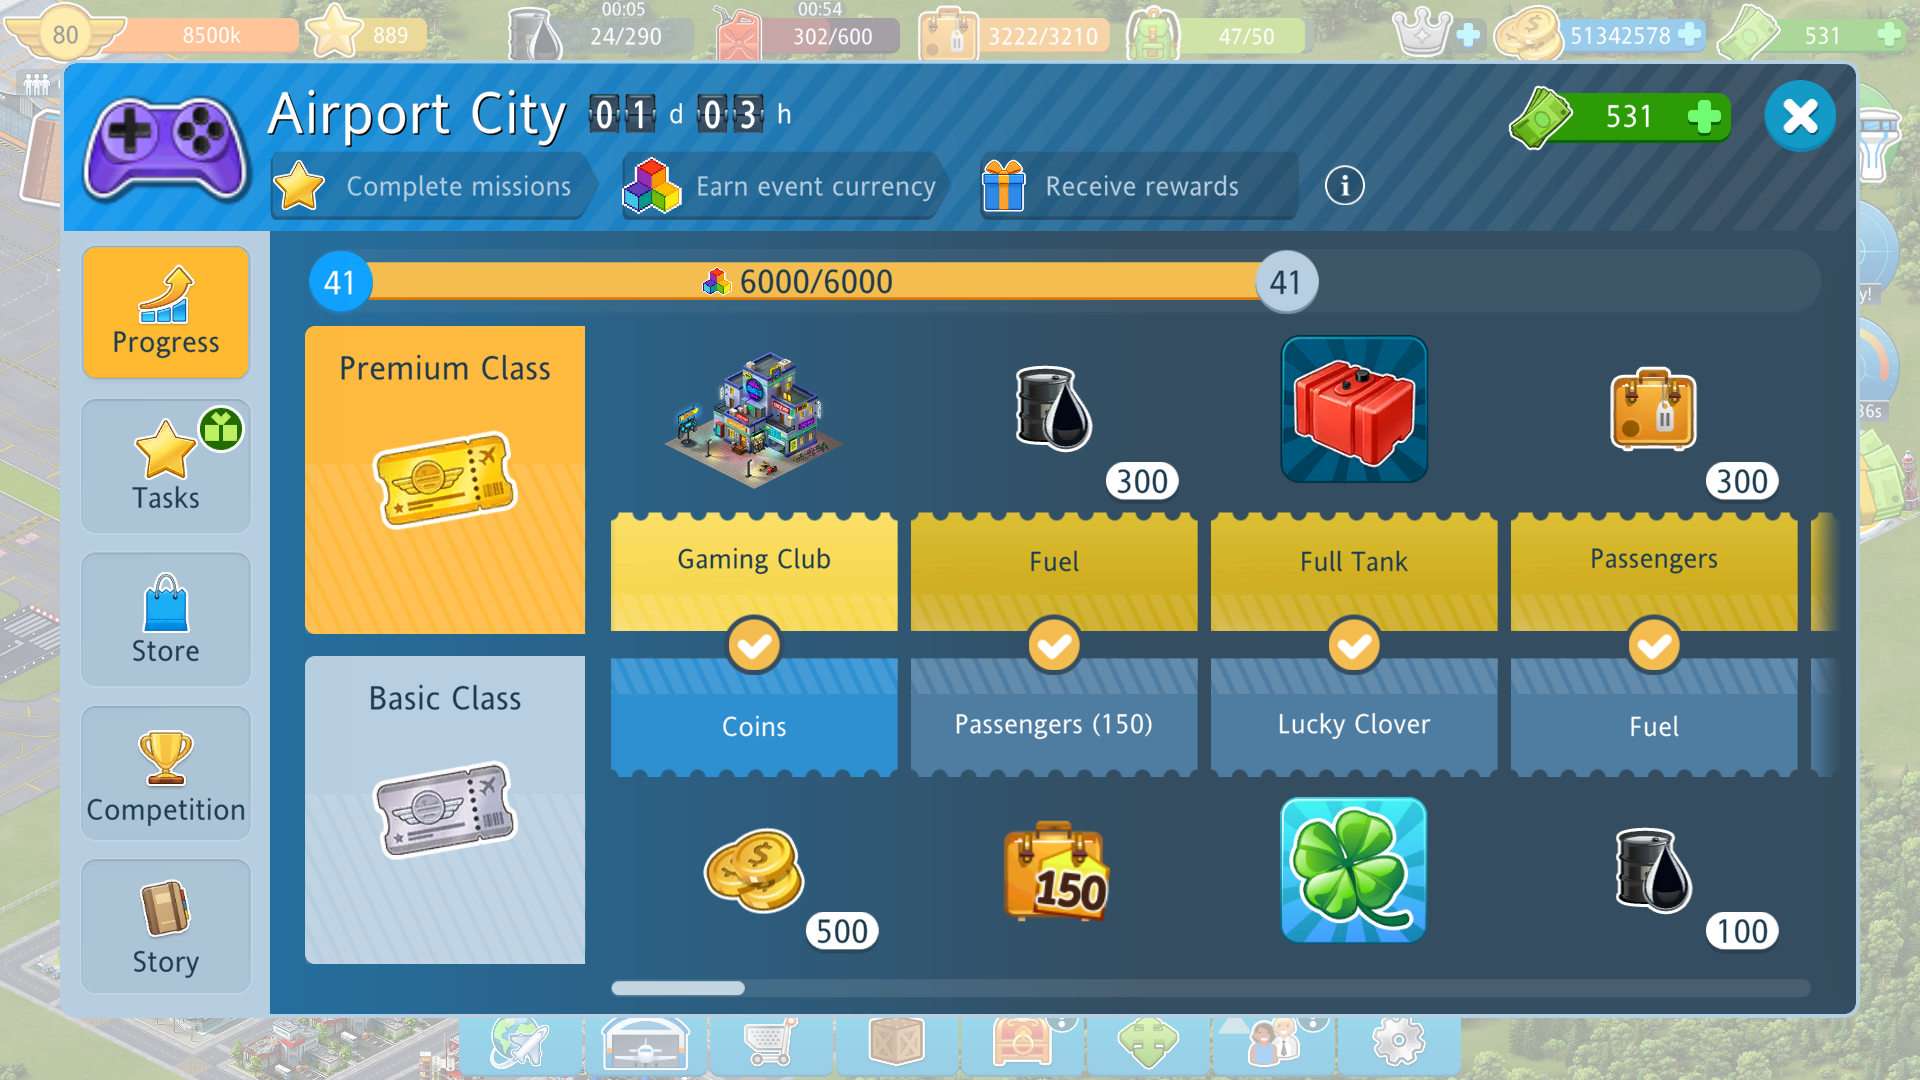 AirportCity2022_20ghozgdl_success_tasks.png